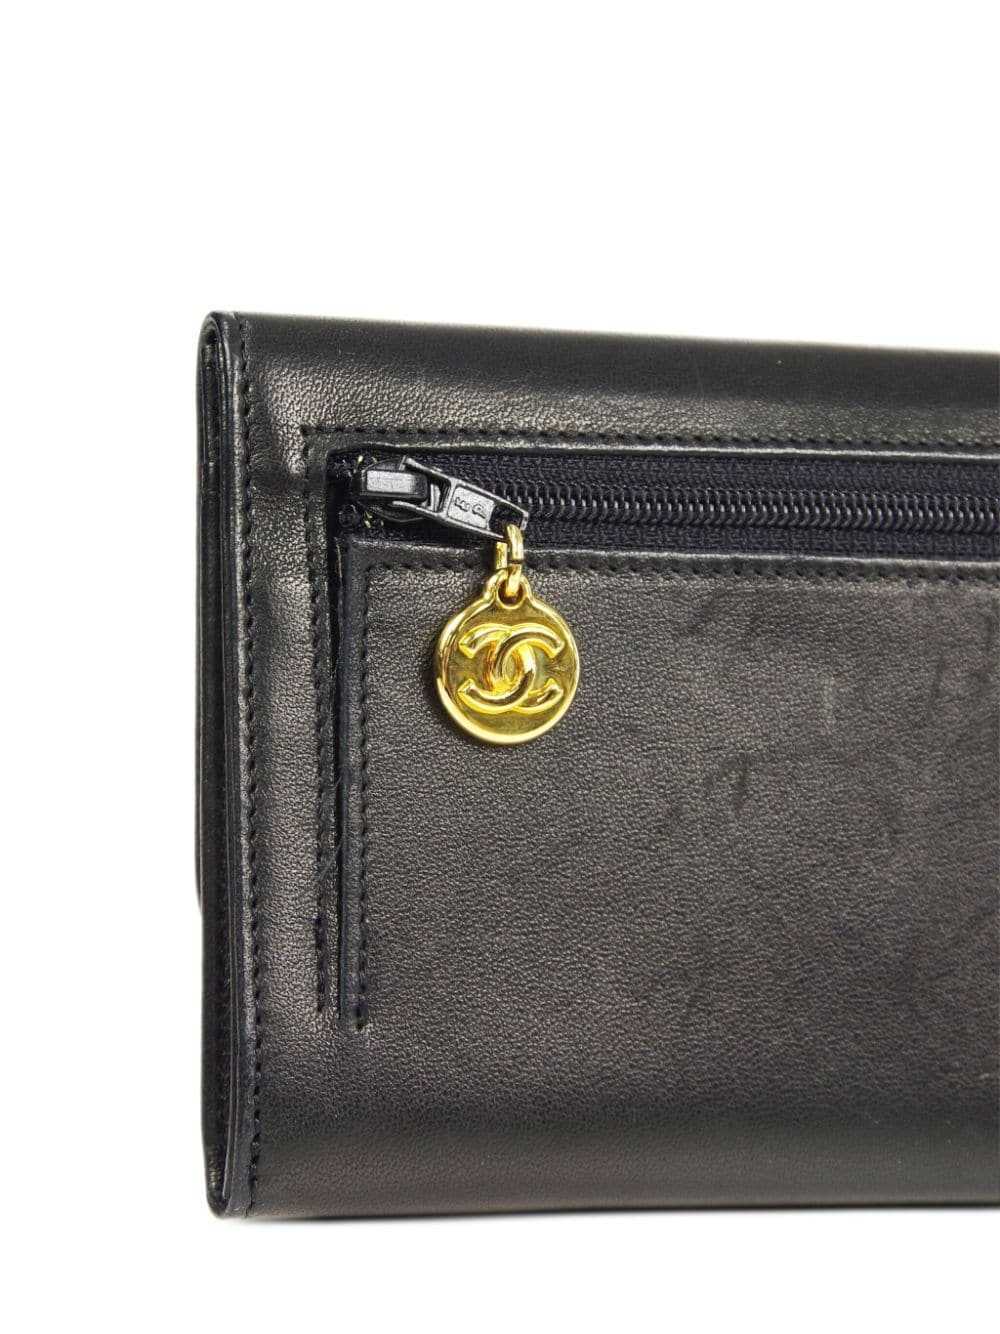 CHANEL Pre-Owned 1997 CC leather wallet - Black - image 3